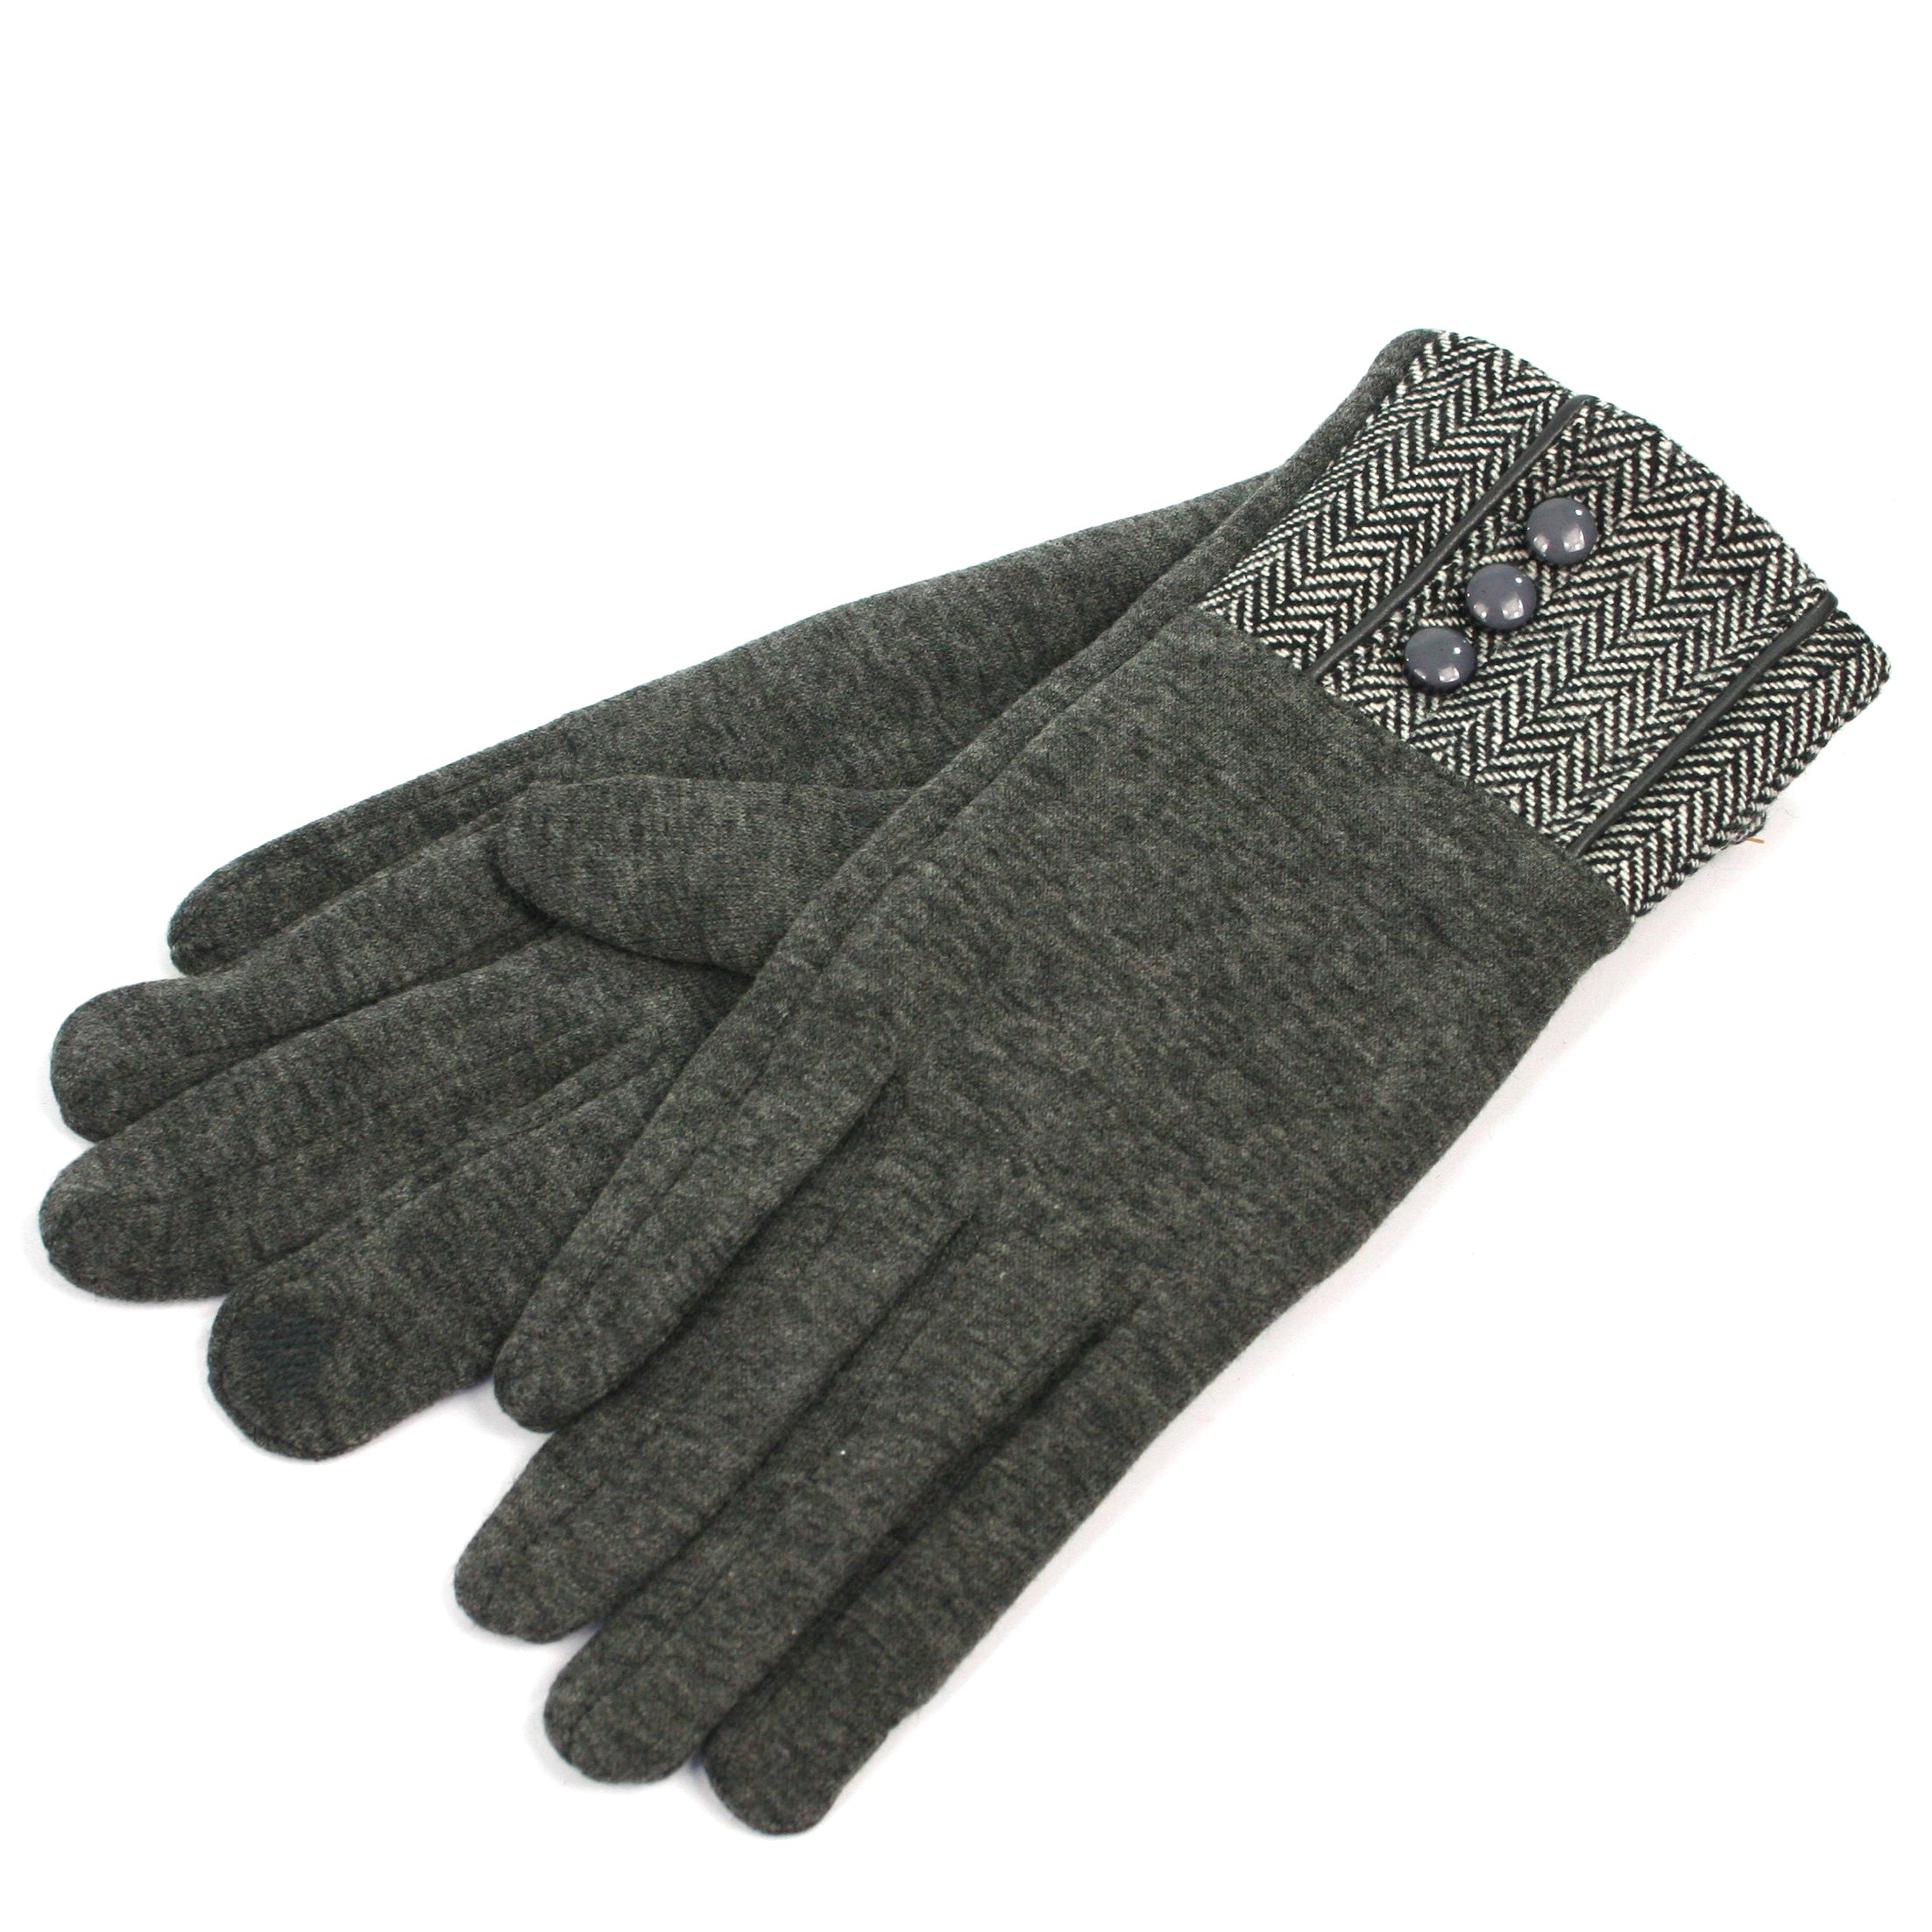 soft ladies gloves with herringbone and button detailing